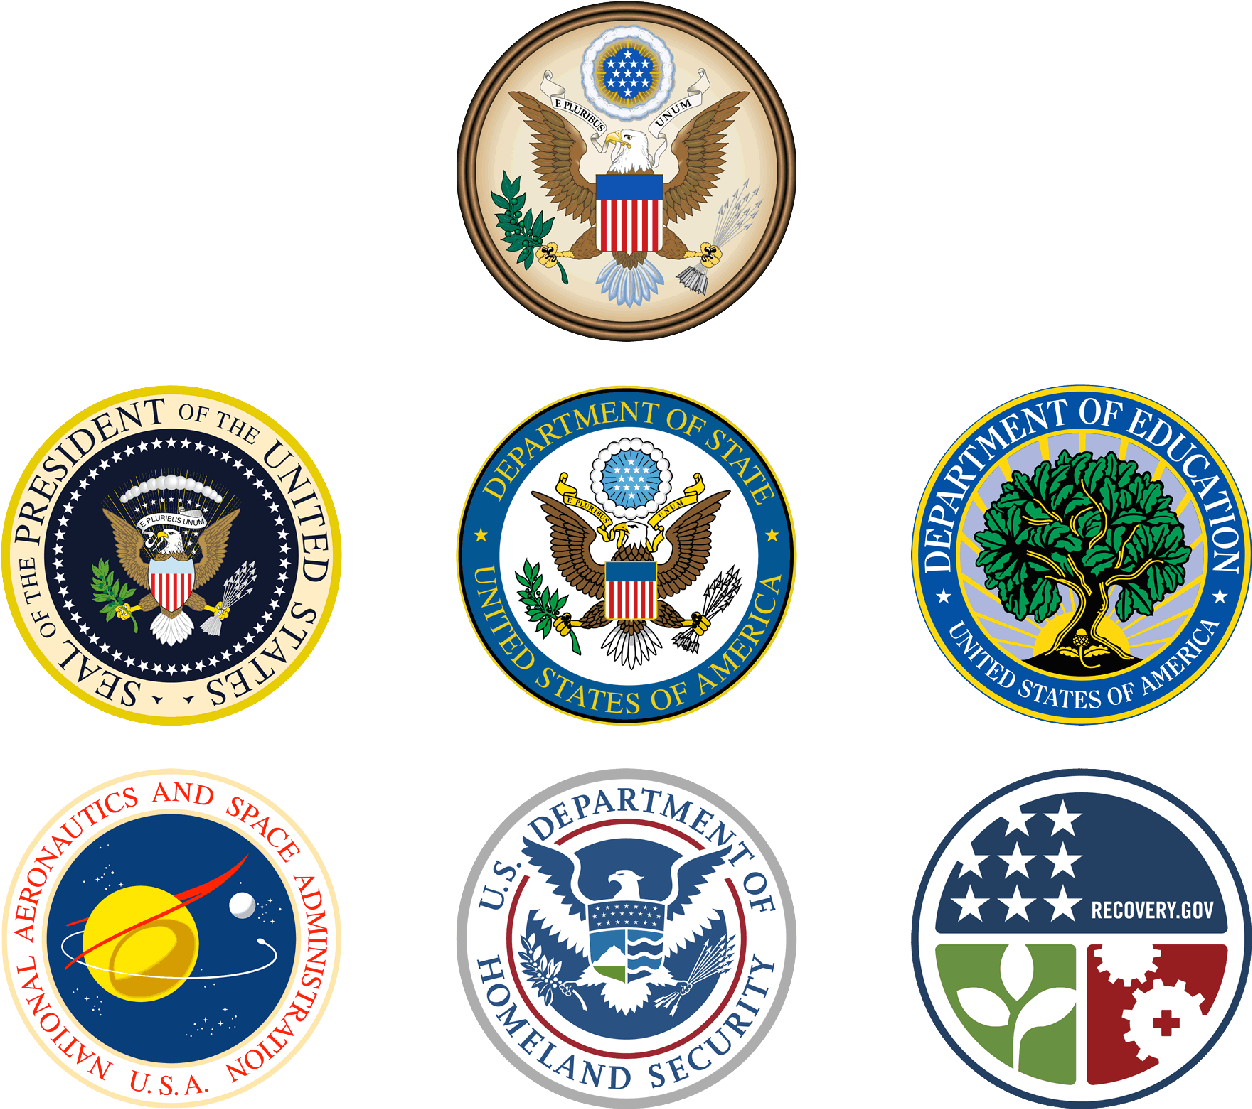 Great Seal Of The United States And Seals For The President, - Seal Of The United States (1280x1137)